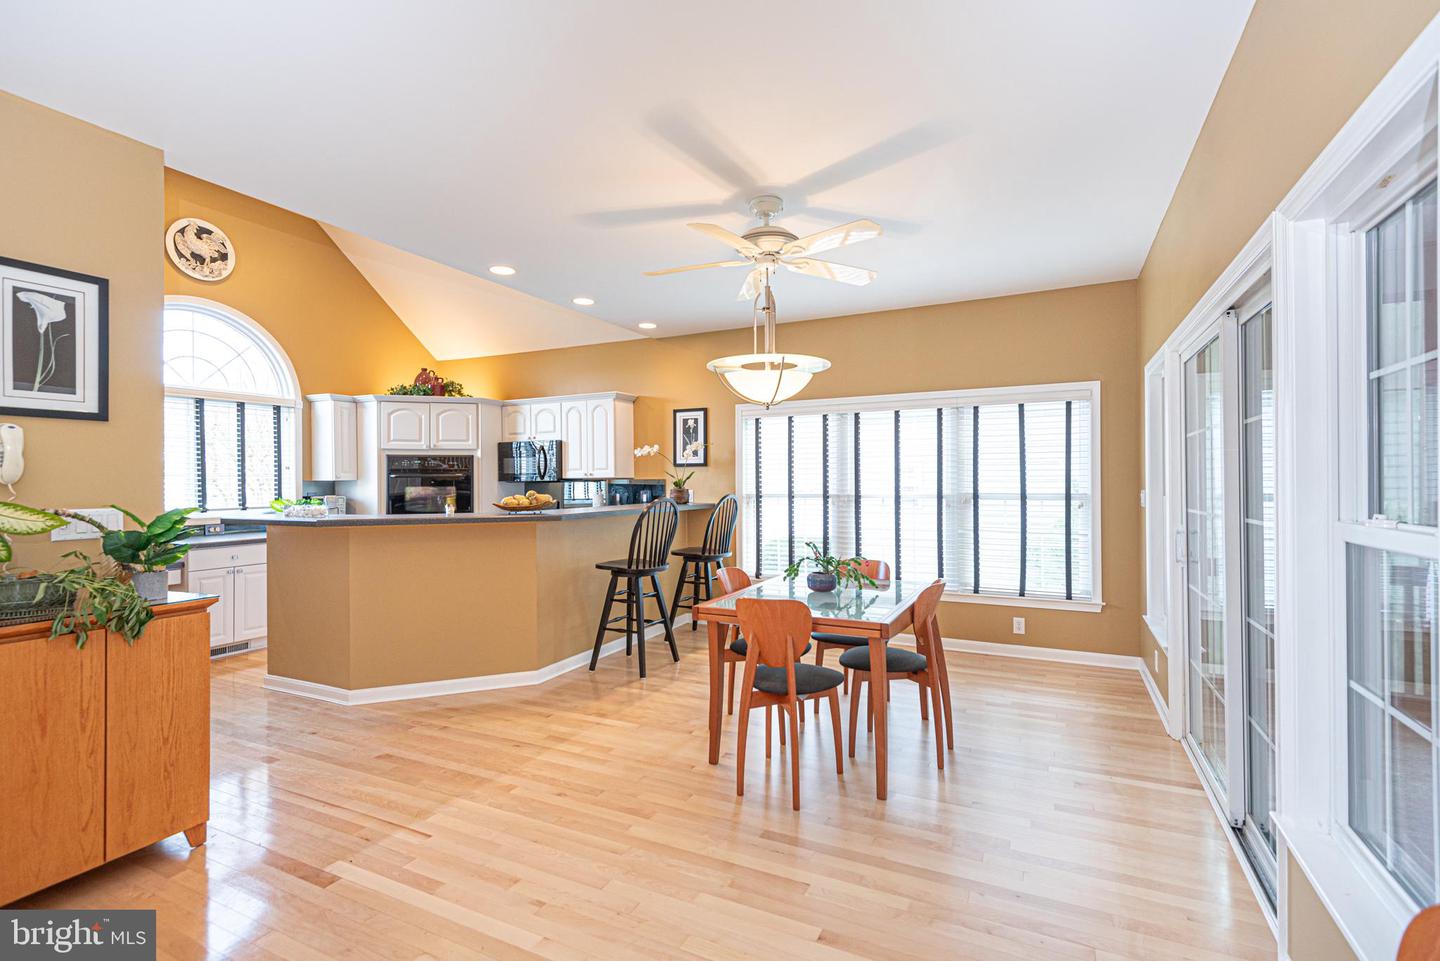 MDWO2019426-802903995052-2024-03-08-00-14-50 106 Pine Forest Dr | Berlin, MD Real Estate For Sale | MLS# Mdwo2019426  - 1st Choice Properties